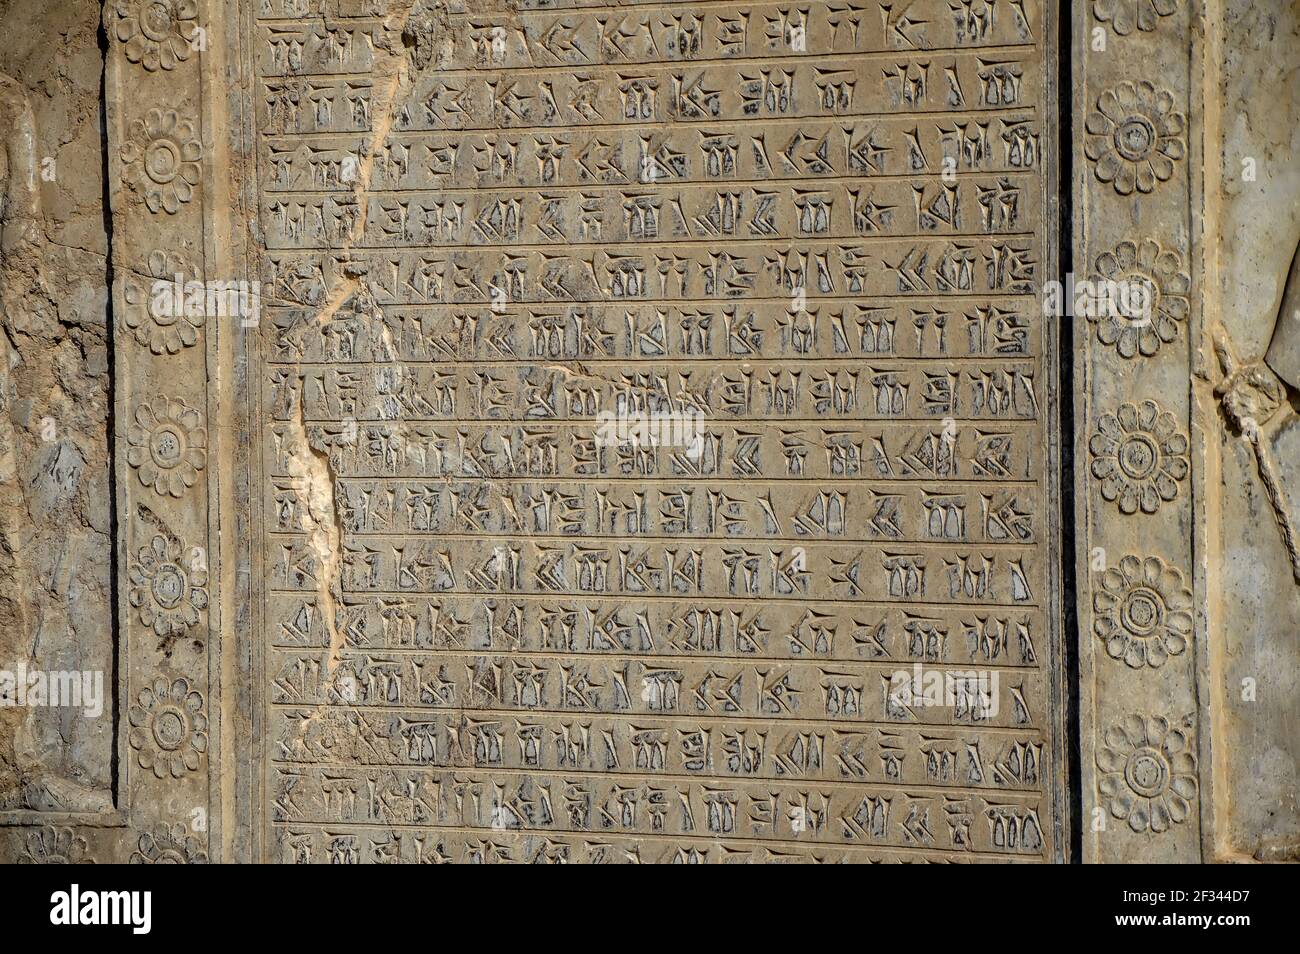 A tablet with cuneiform inscriptions at Apadana stairs in Persepolis, the ancient capital of the Persian empire, located near Shiraz in Iran Stock Photo